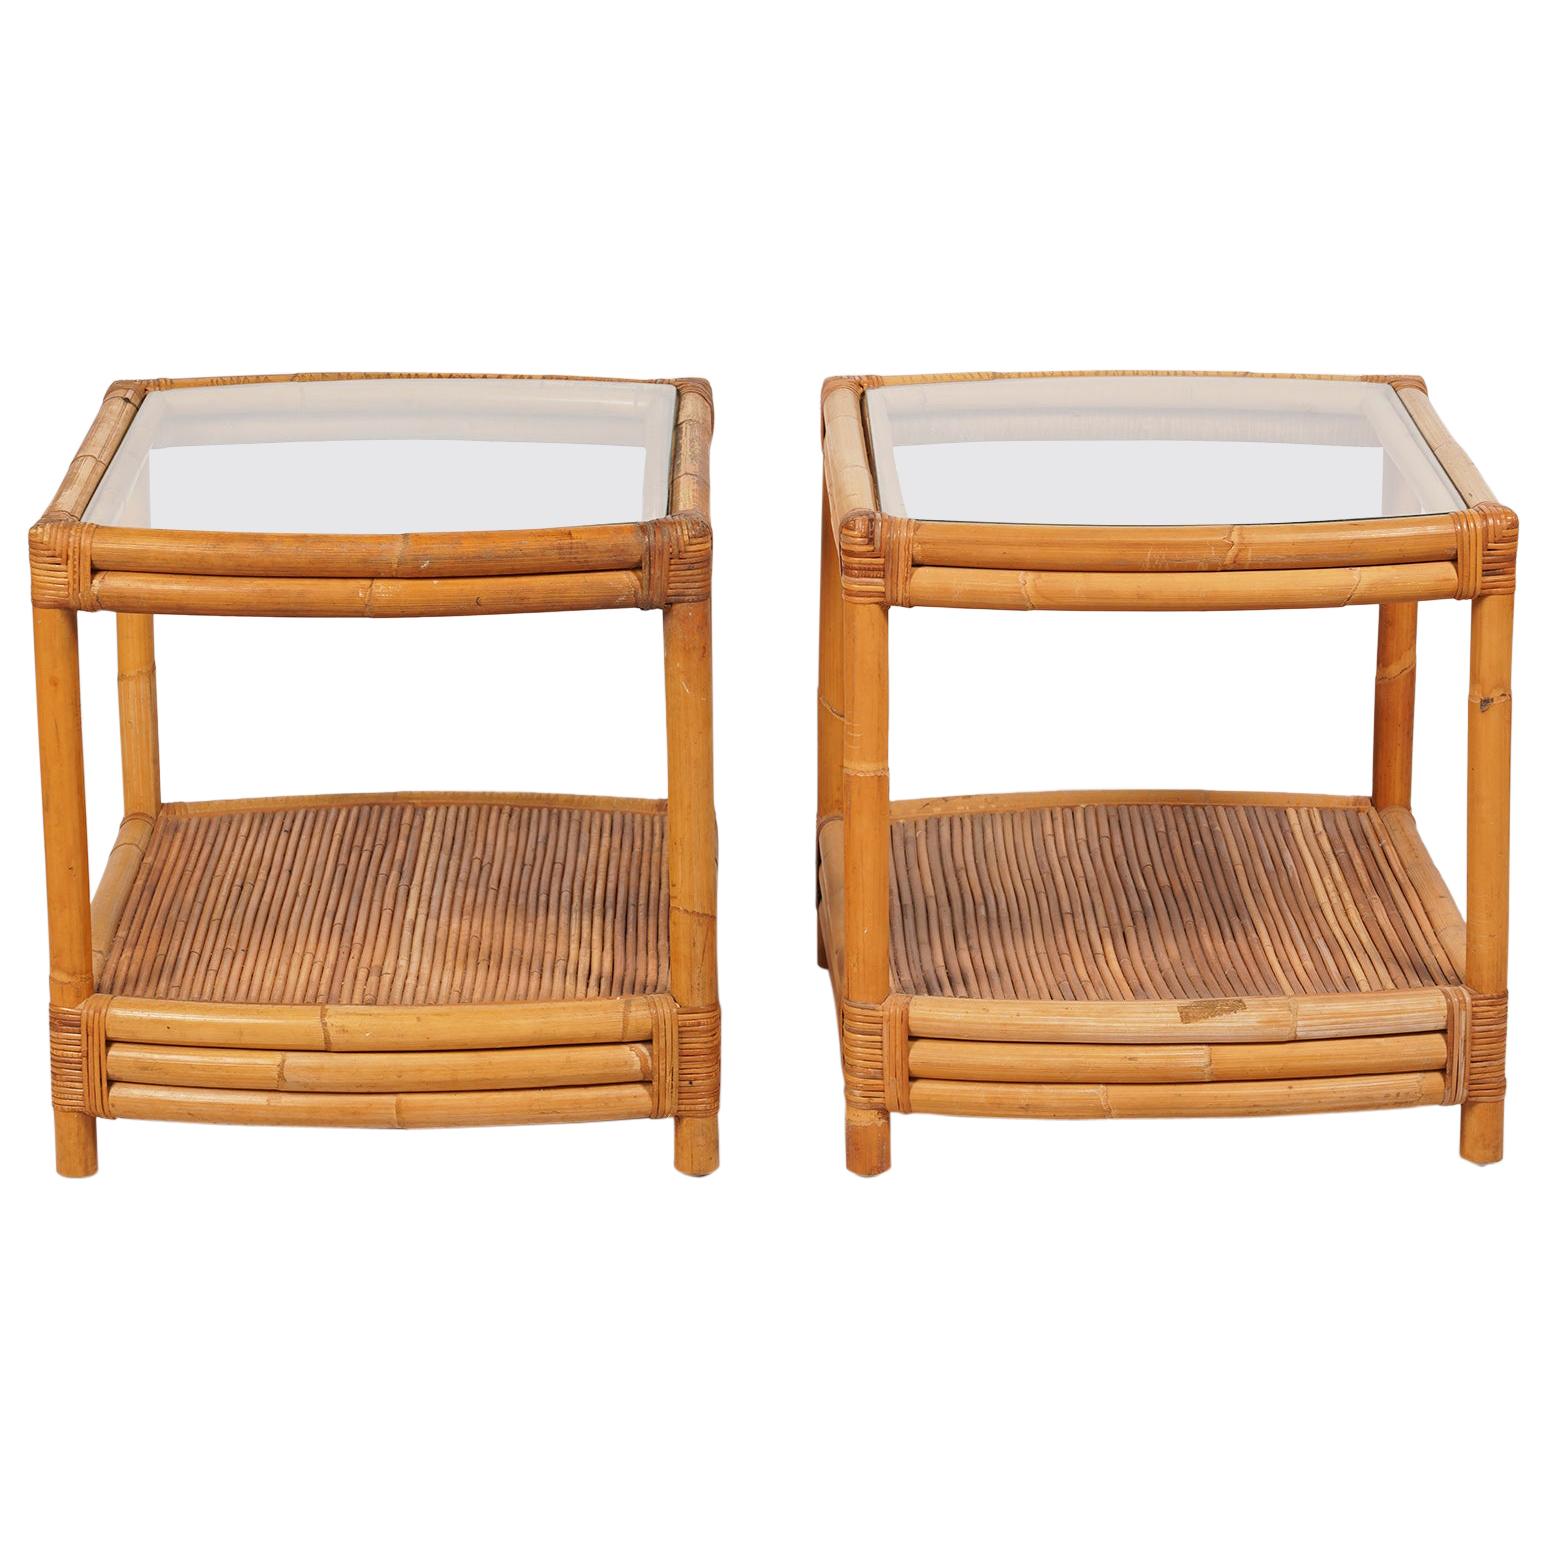 Pair of Vintage Rattan Bamboo Two-Tier Glass Top Curved End Side Tables